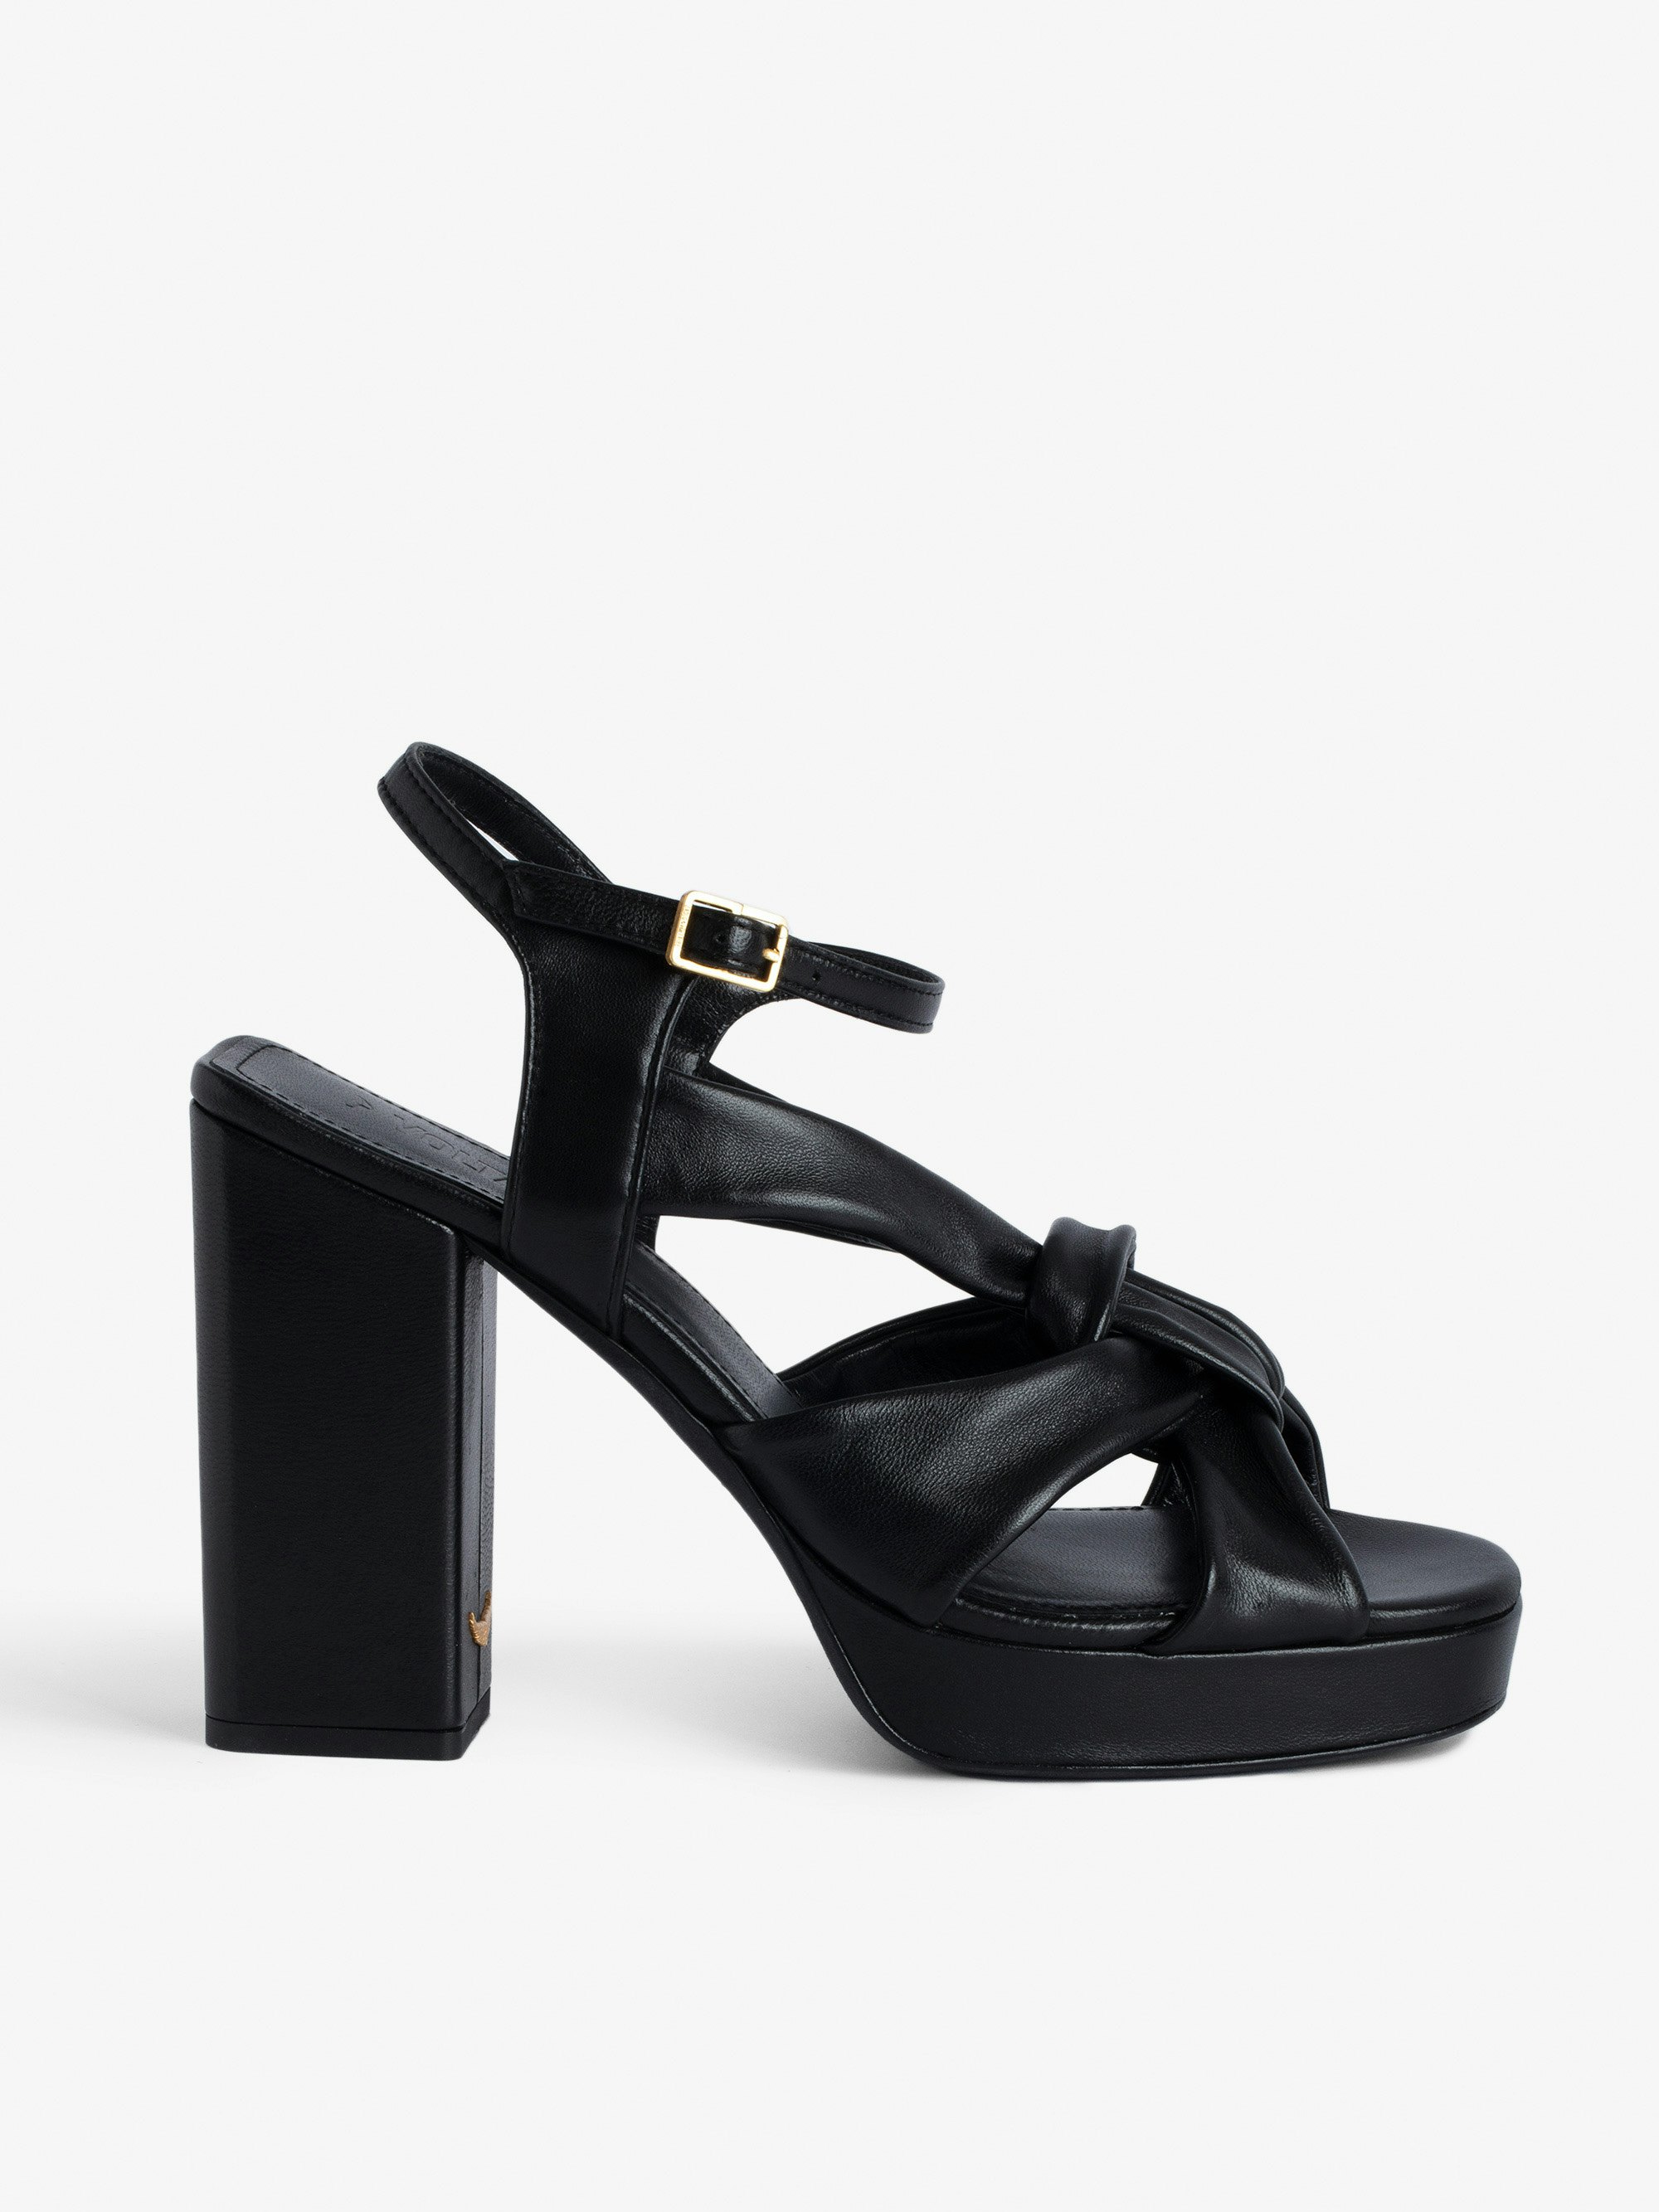 Forget Me Knot Sandals - Women’s black leather high-heeled sandals with strap and bow.